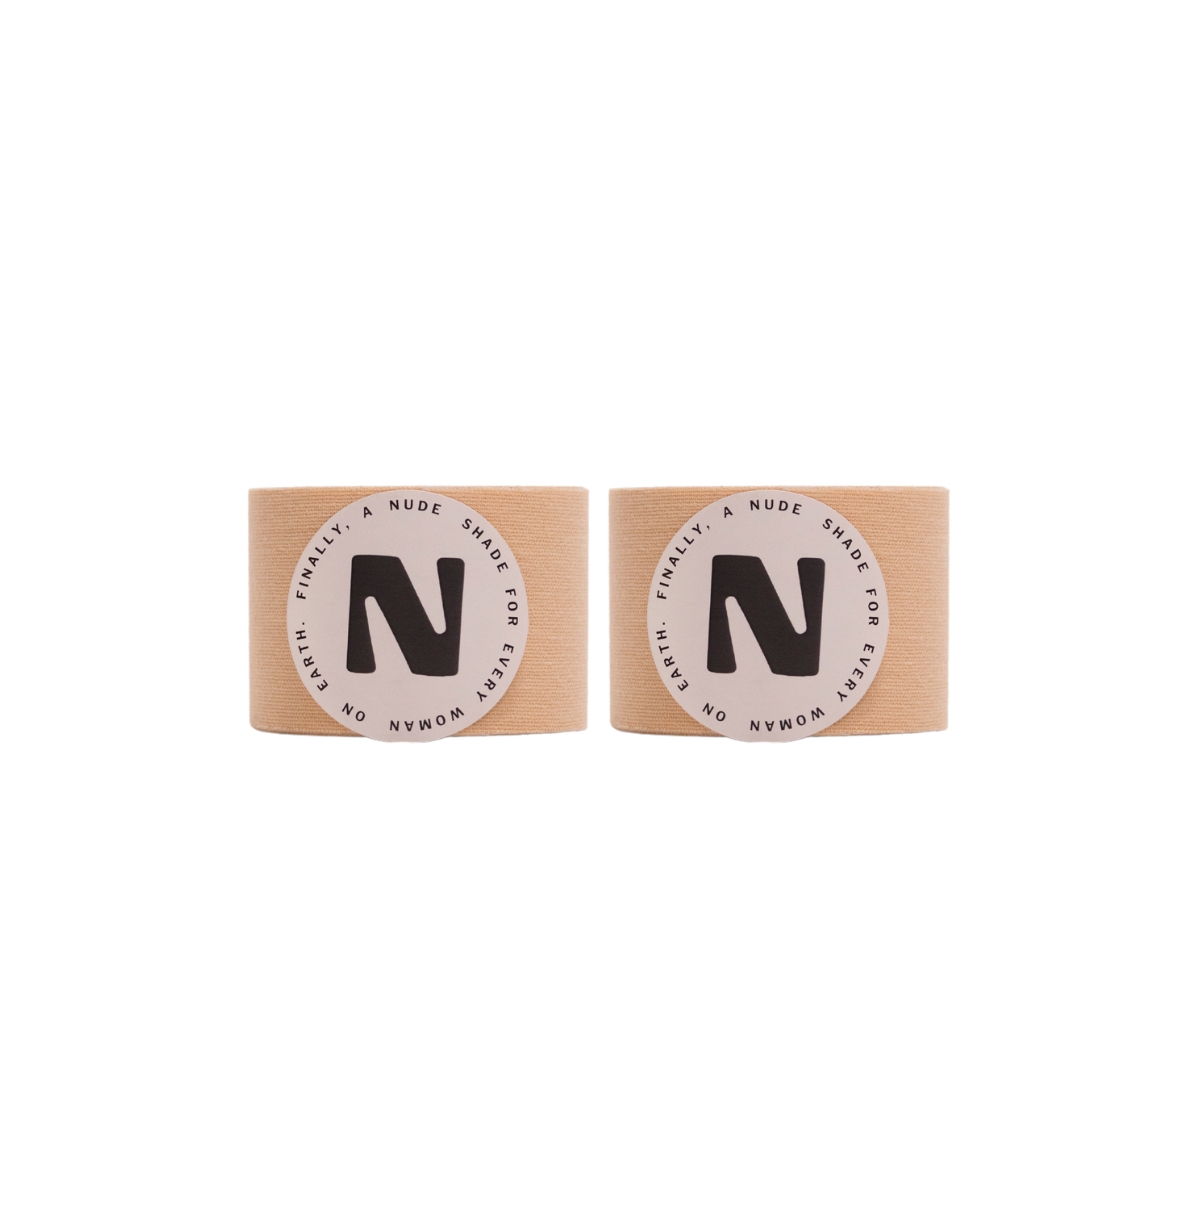 Women's The Grip Kit: Nude Shade Sweat-Proof Boob Tape 2-Pack Set - Almond